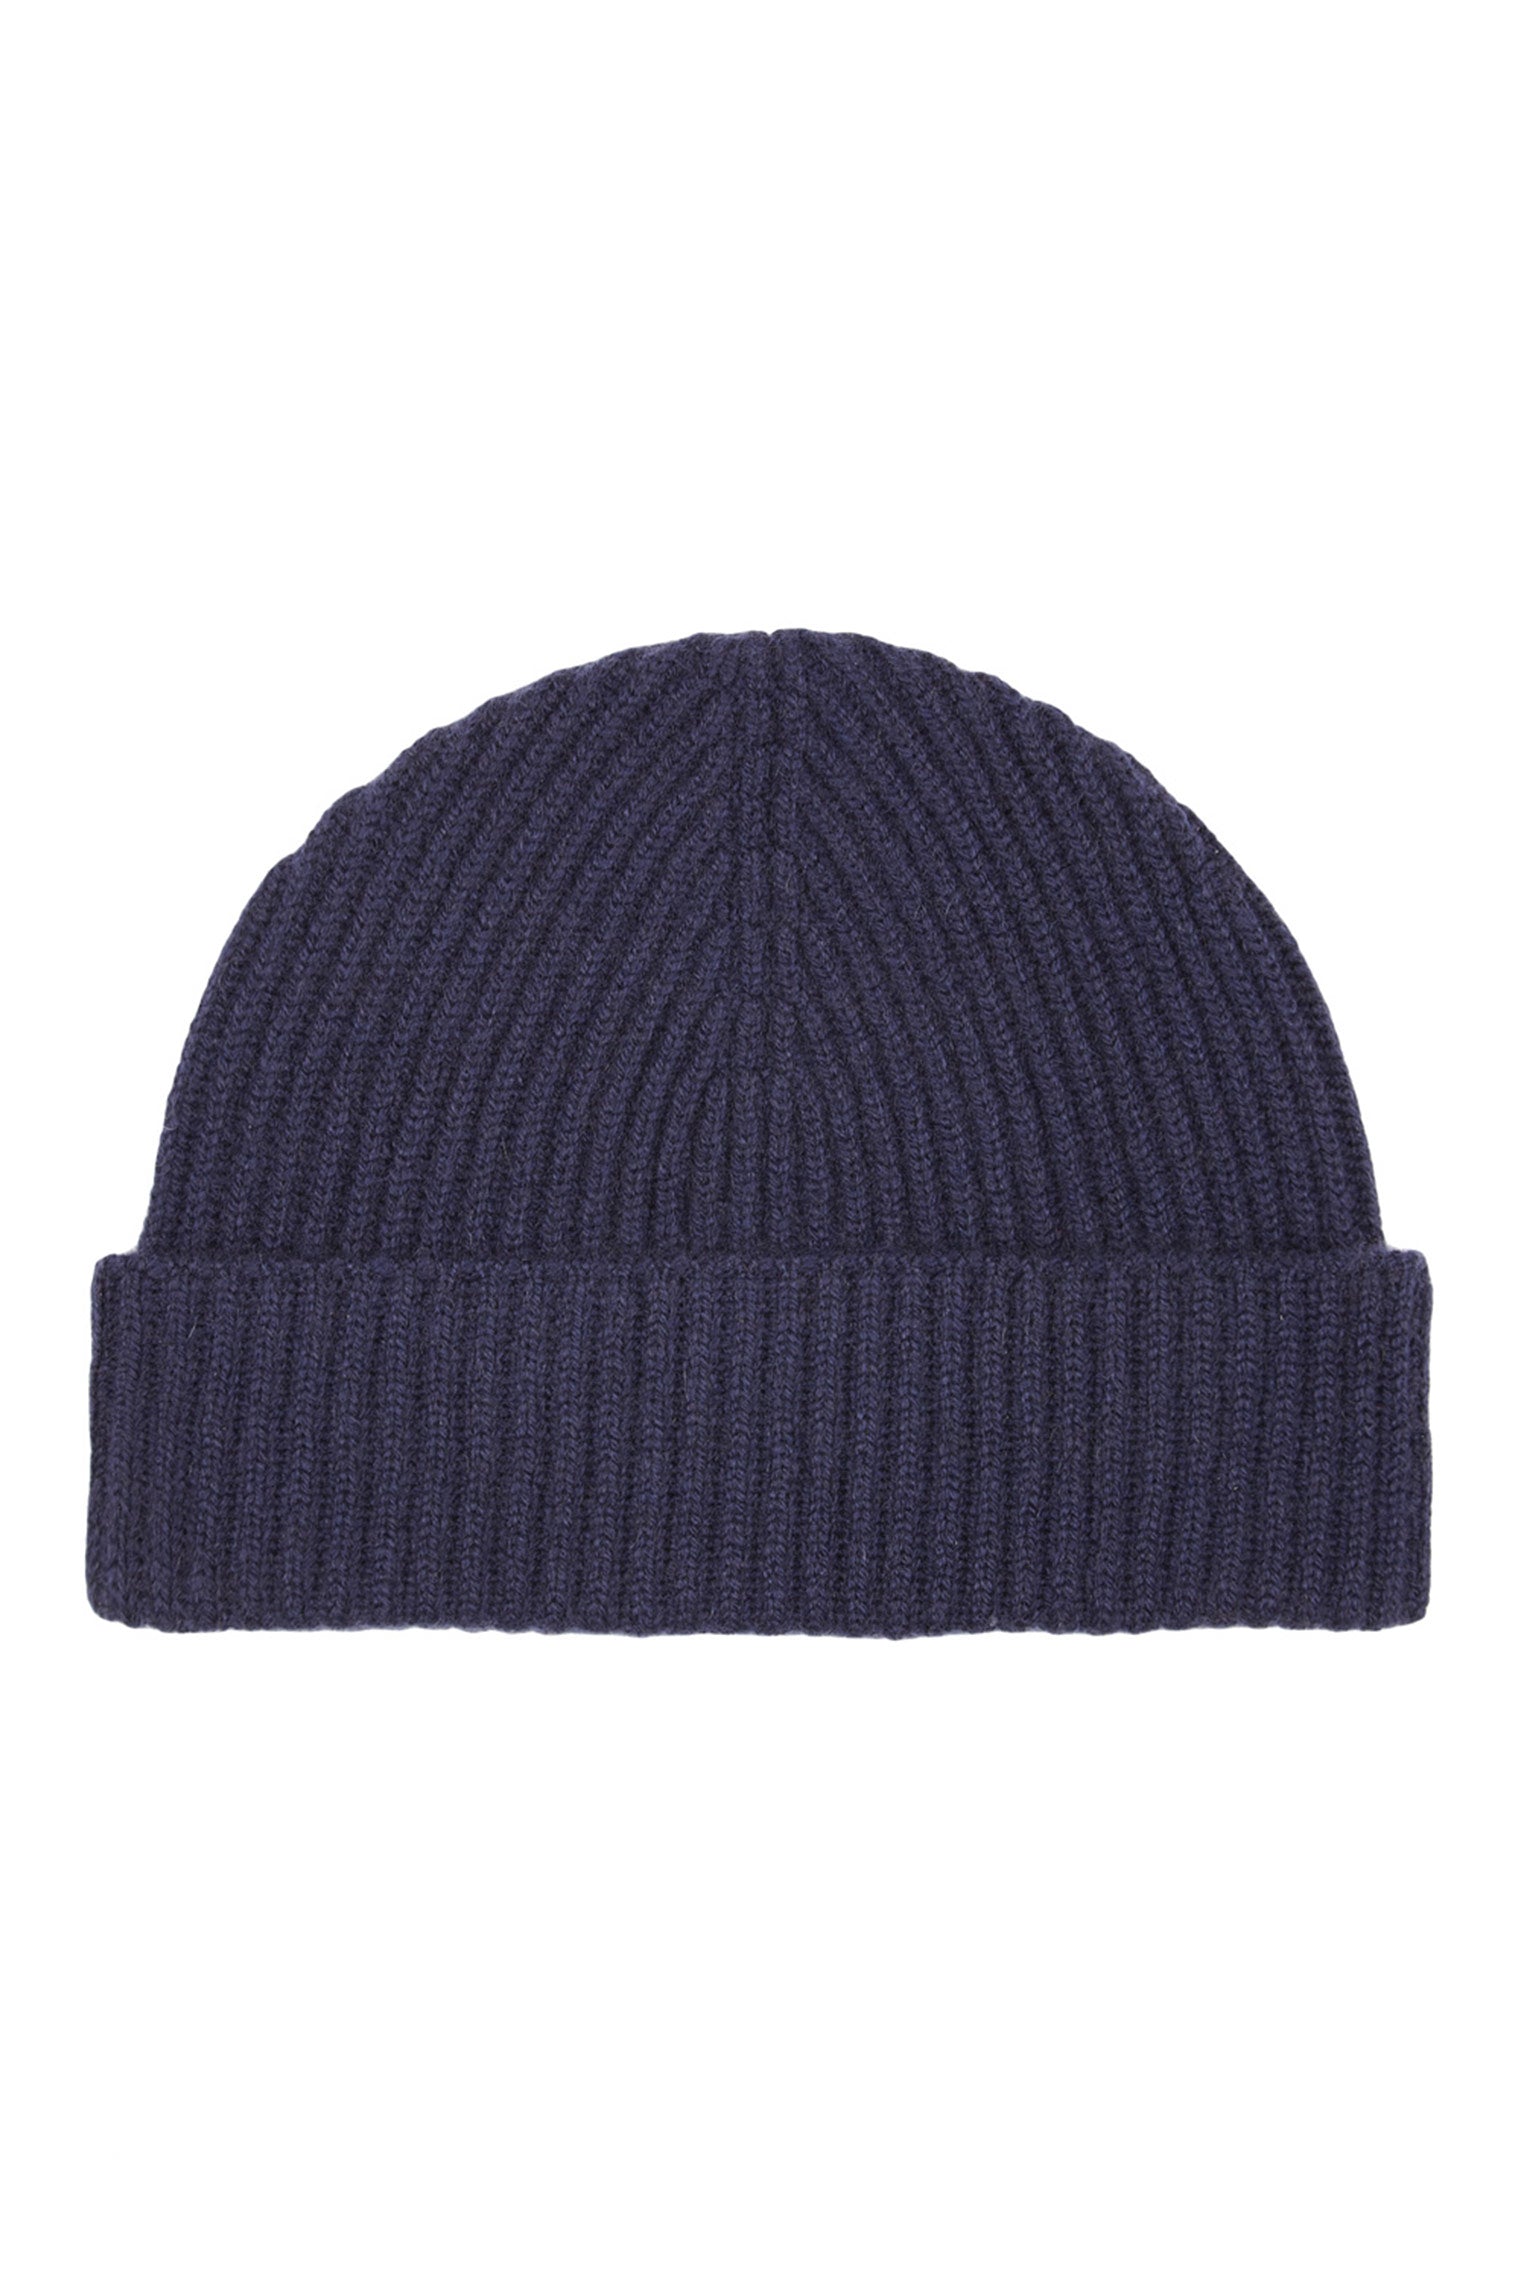 Blue Cashmere Ski Beanie - You May Also Like - Lock & Co. Hatters London UK